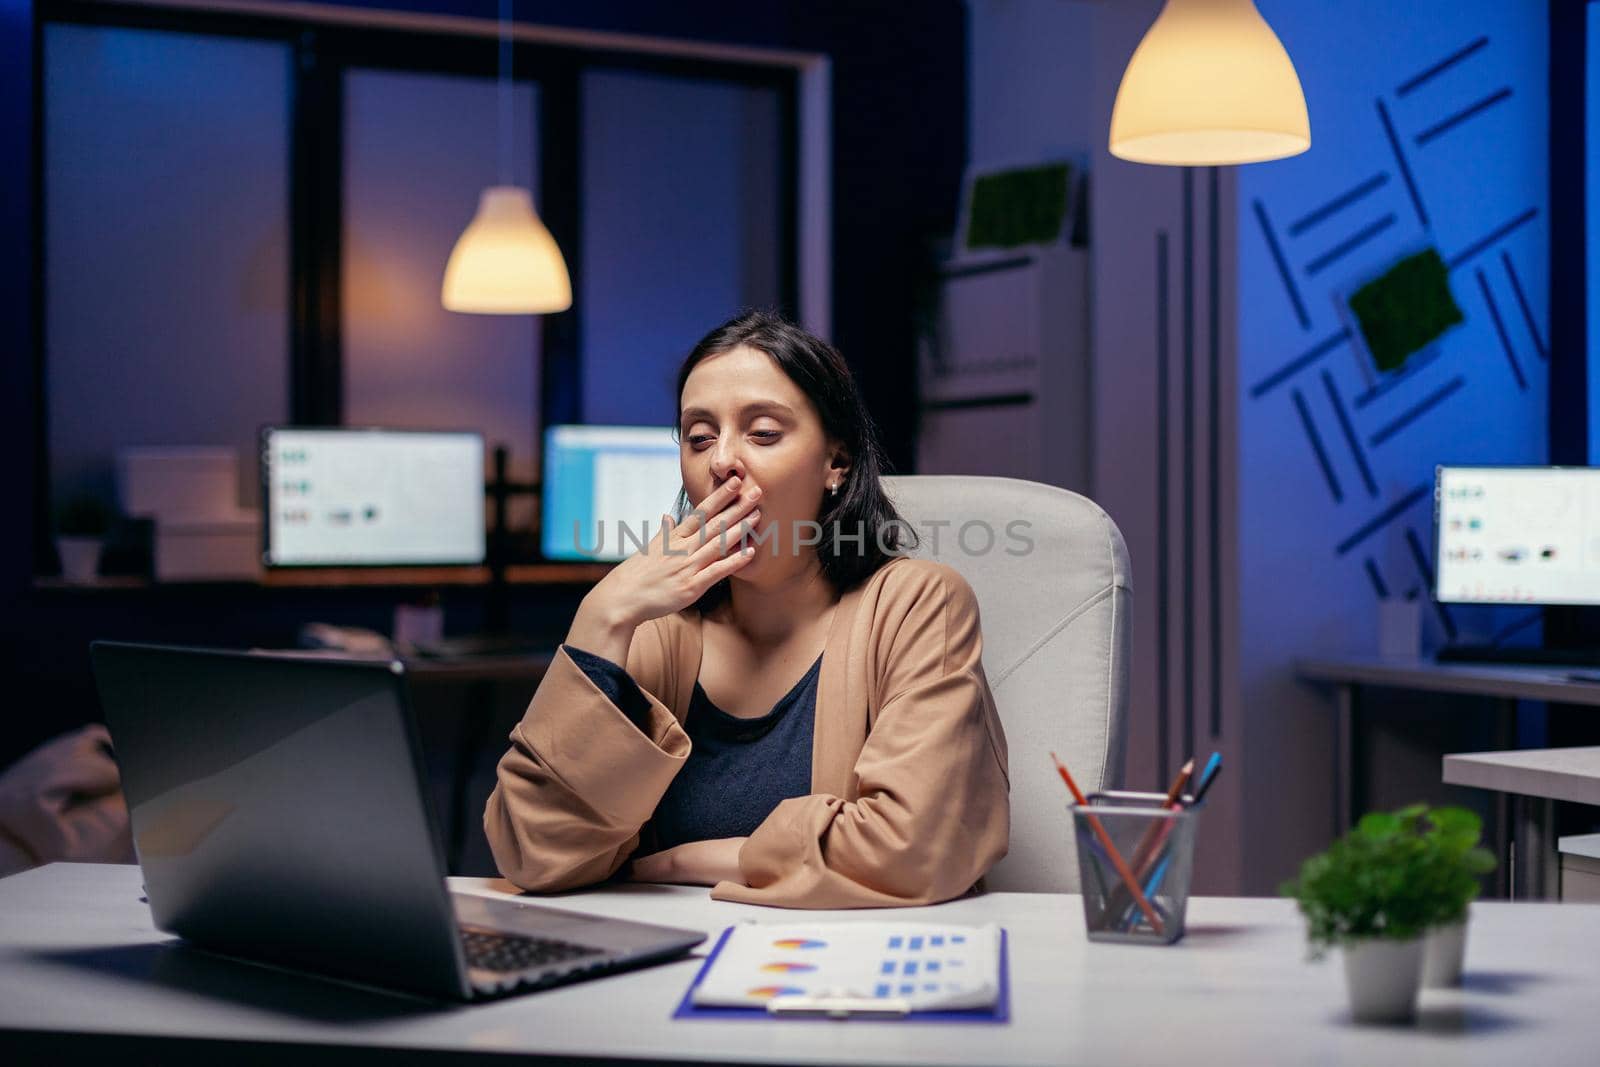 Sleepy businesswoman yawns while working on laptop trying to finish a project deadline. Smart woman sitting at her workplace in the course of late night hours doing her job.